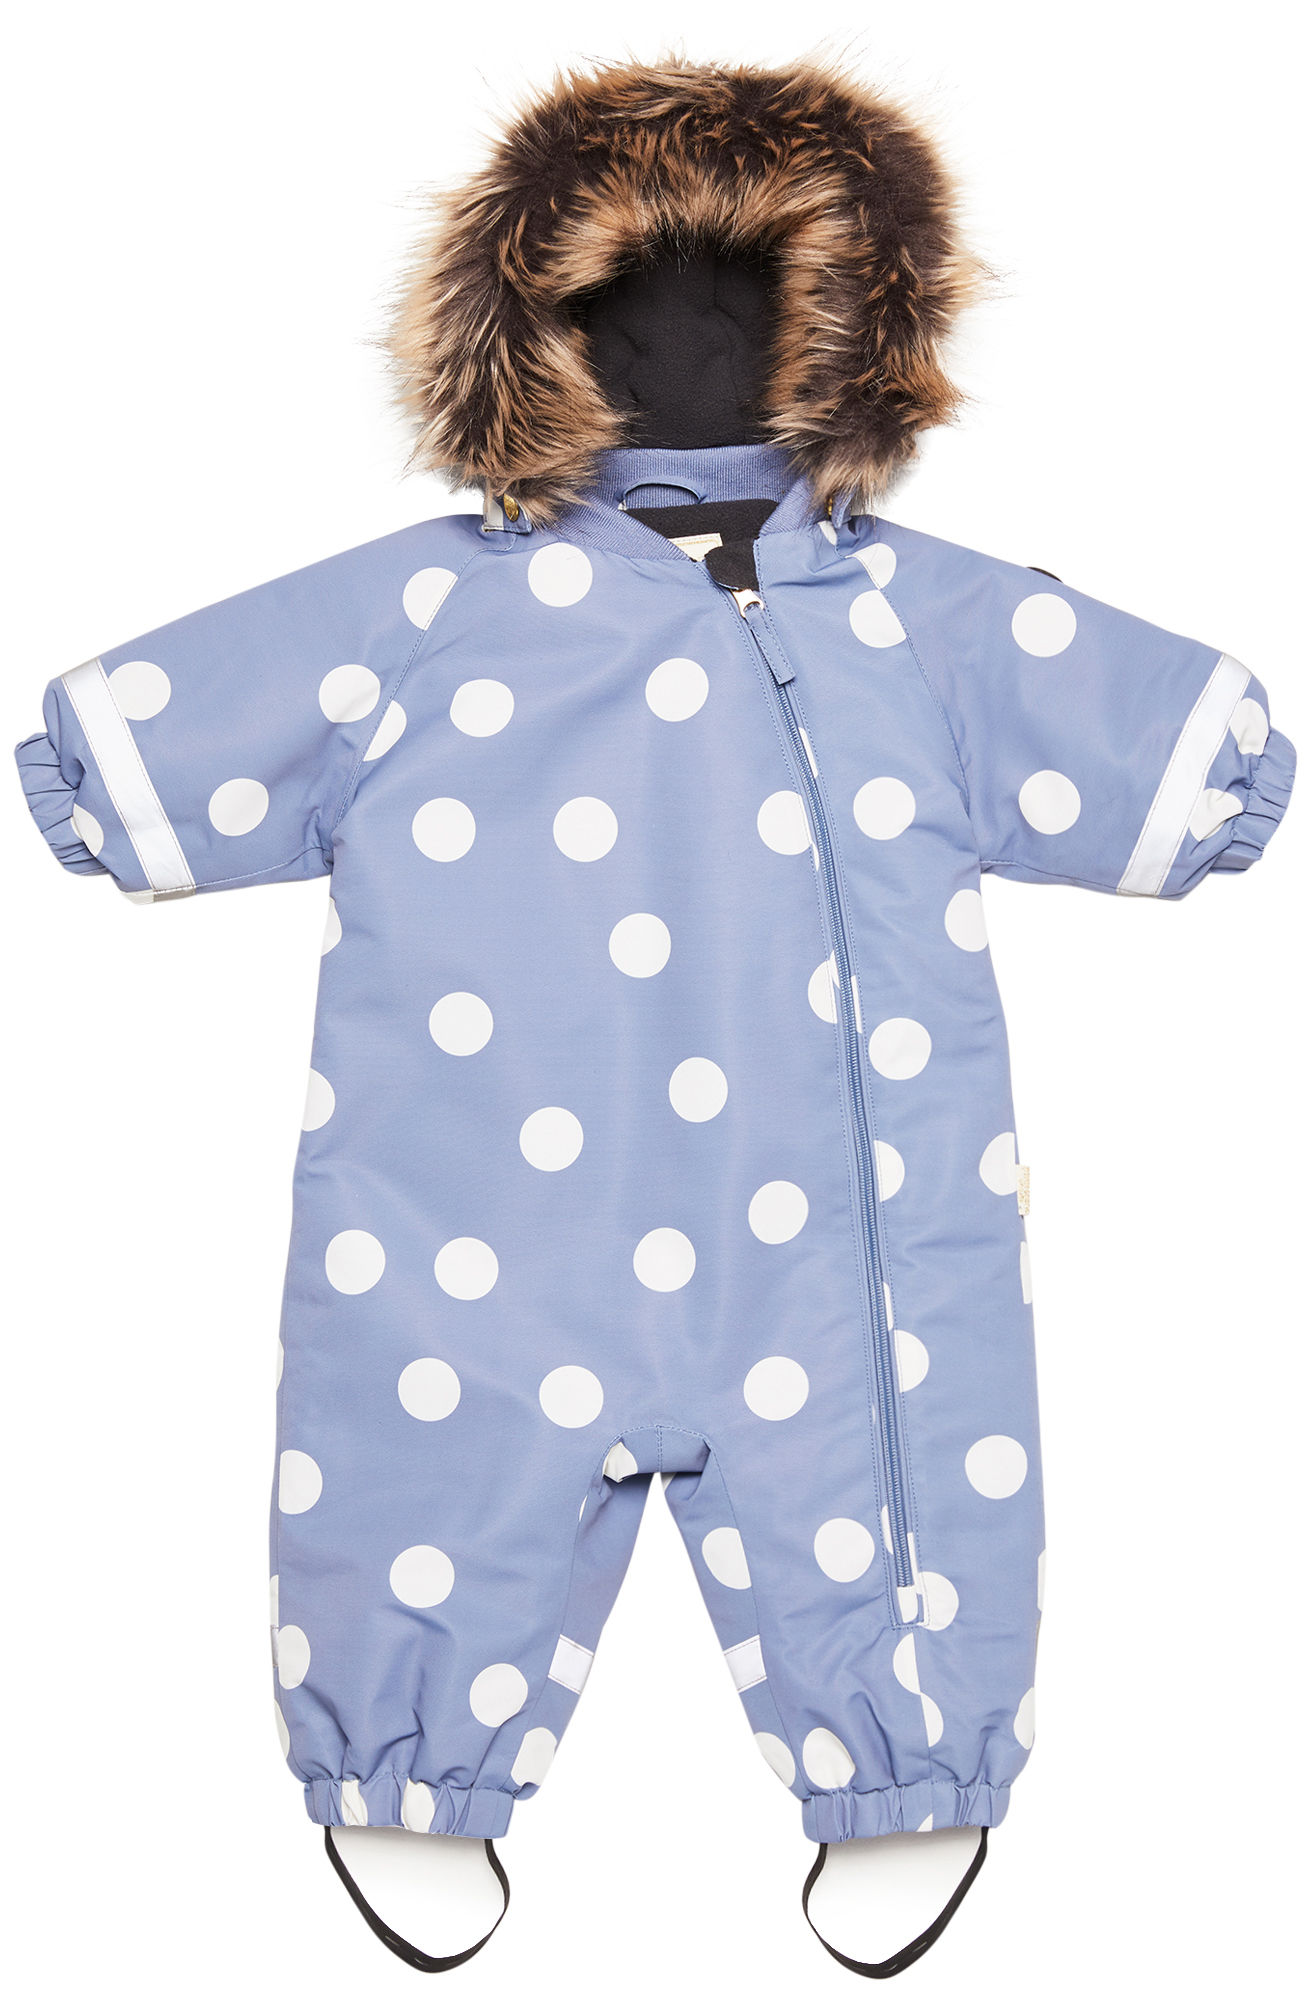 Petite Chérie Amour Babydress, Dots Country Blue, 62